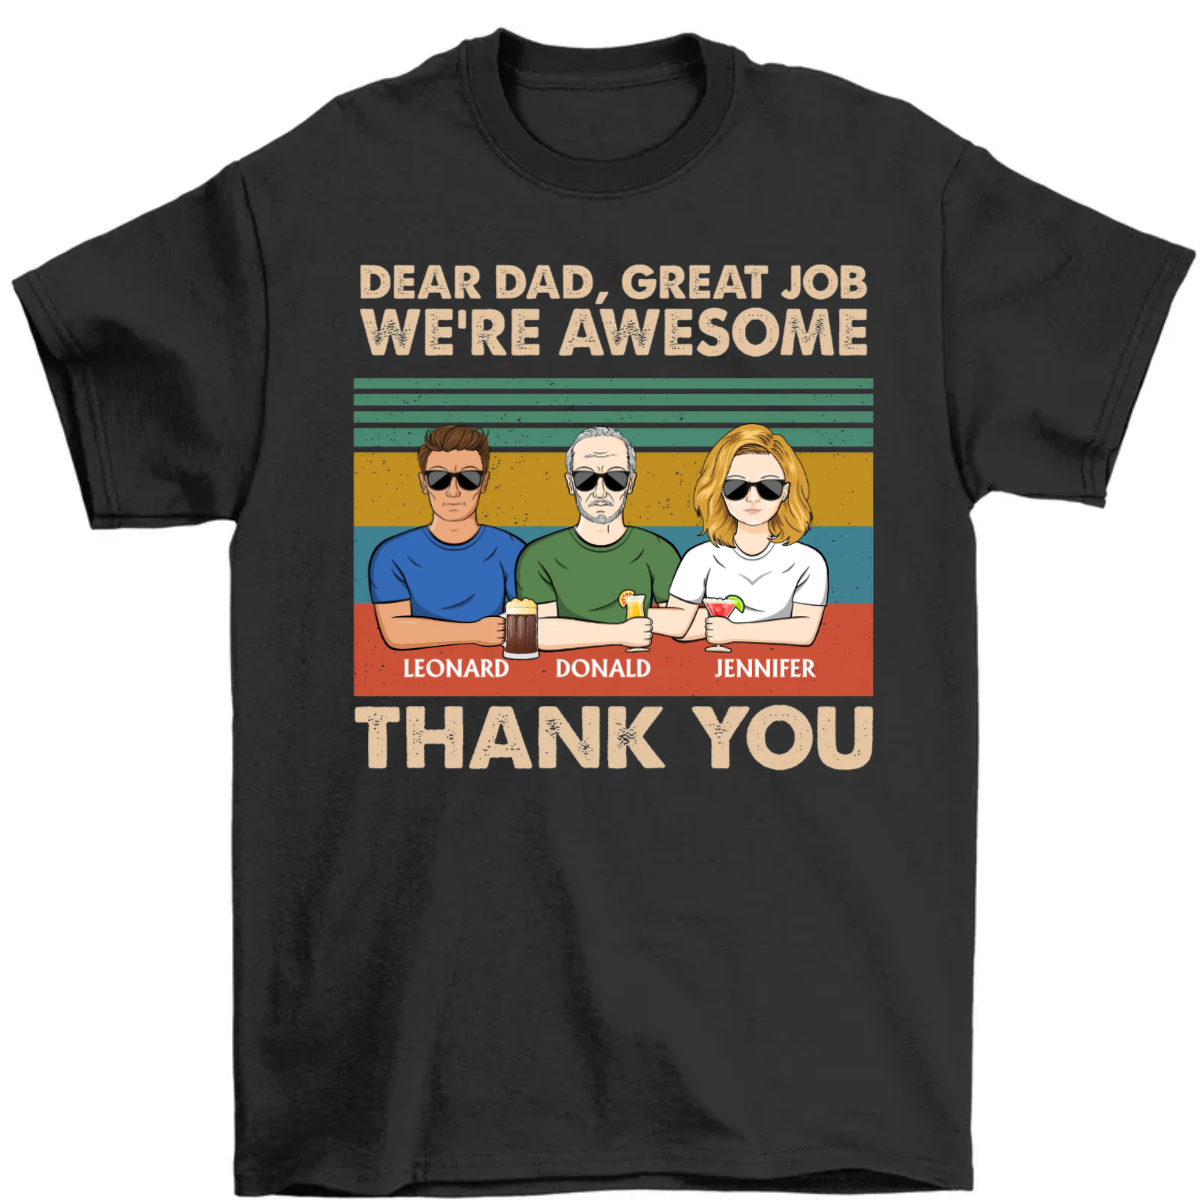 Dear Dad Grandpa Mom Grandma Great Job We're Awesome Thank You - Father Gift - Personalized Custom T Shirt